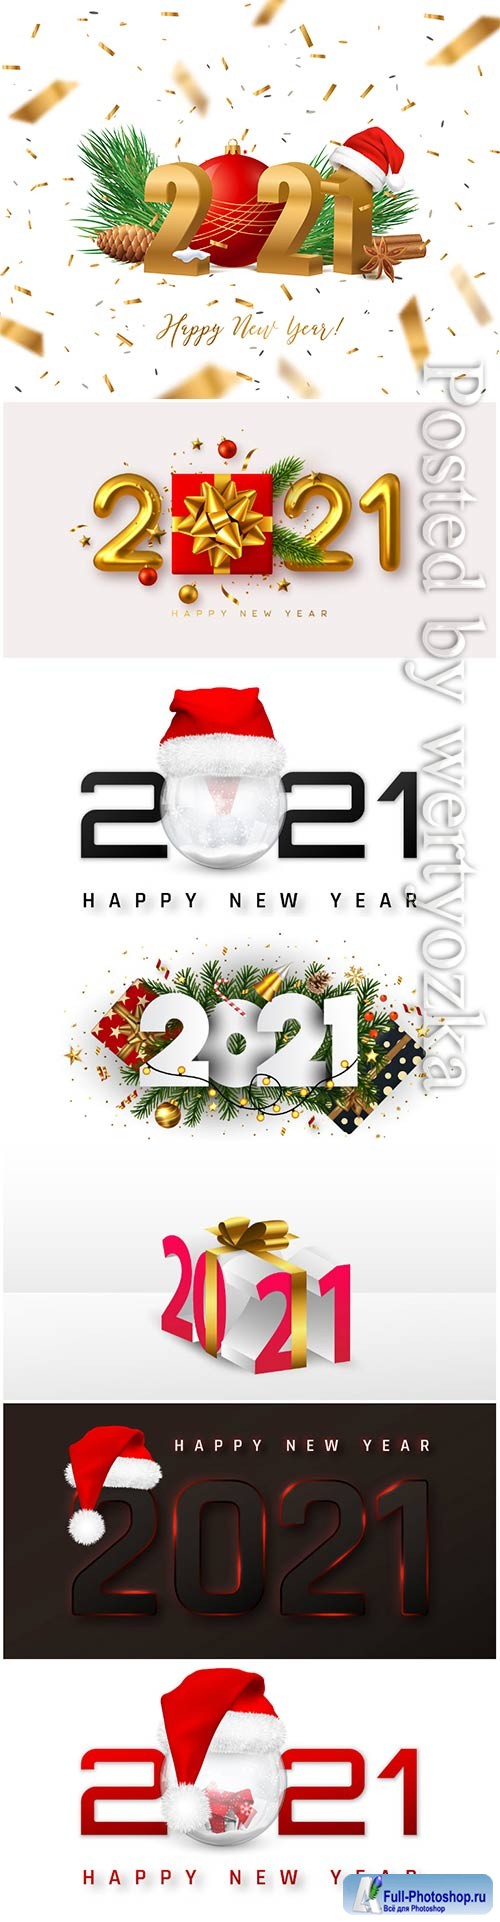 Happy new year 2021 cover with snowball in santa hat in vector